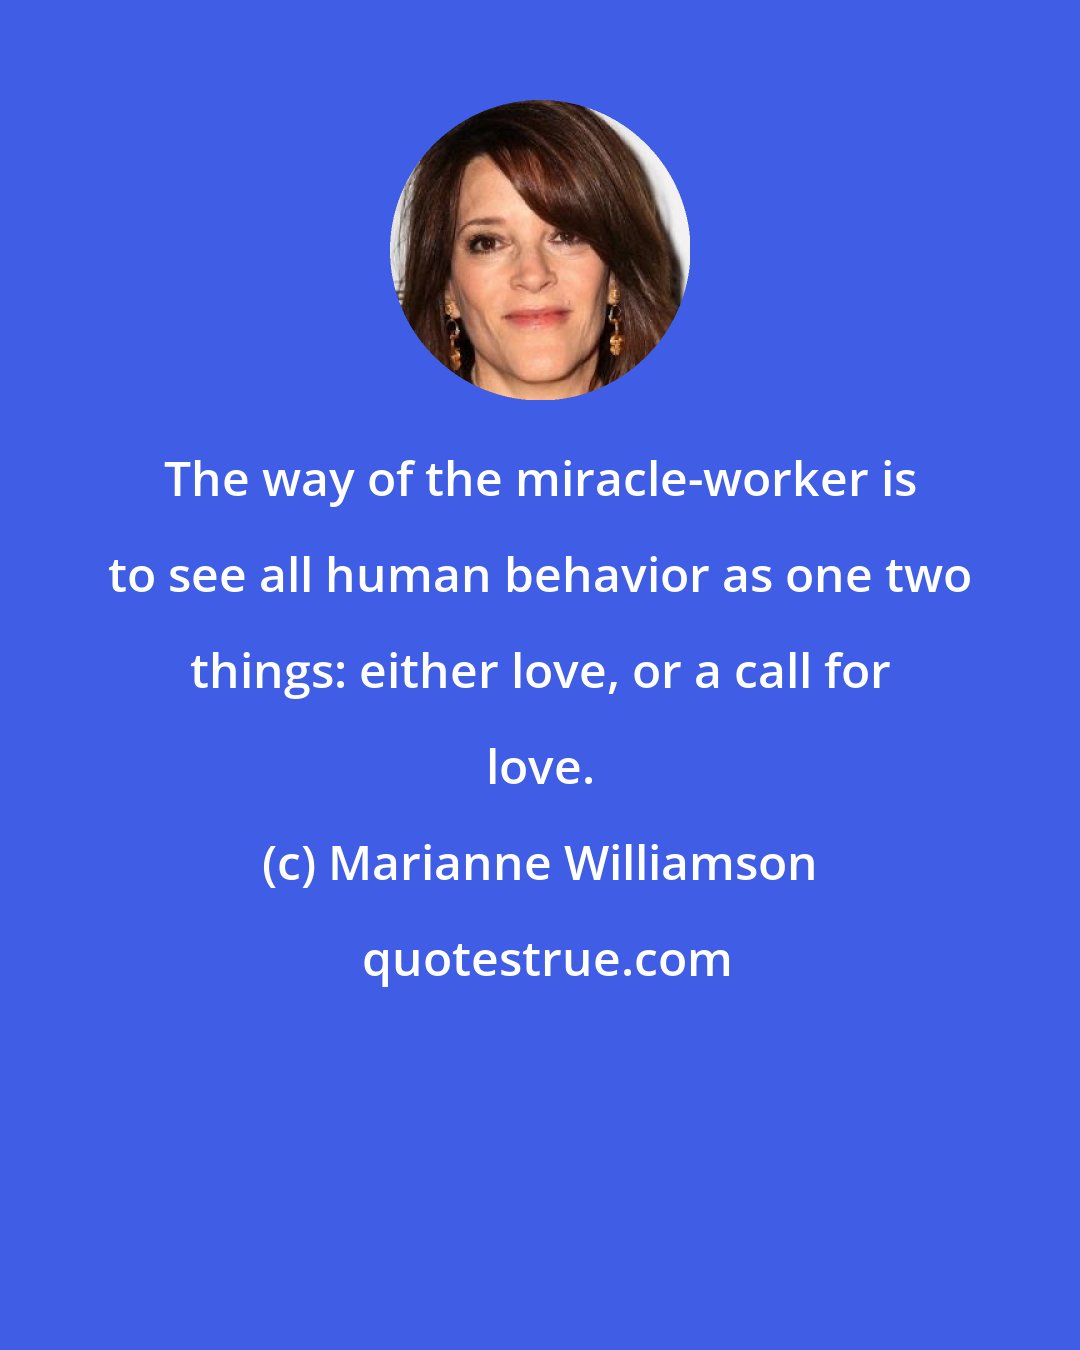 Marianne Williamson: The way of the miracle-worker is to see all human behavior as one two things: either love, or a call for love.